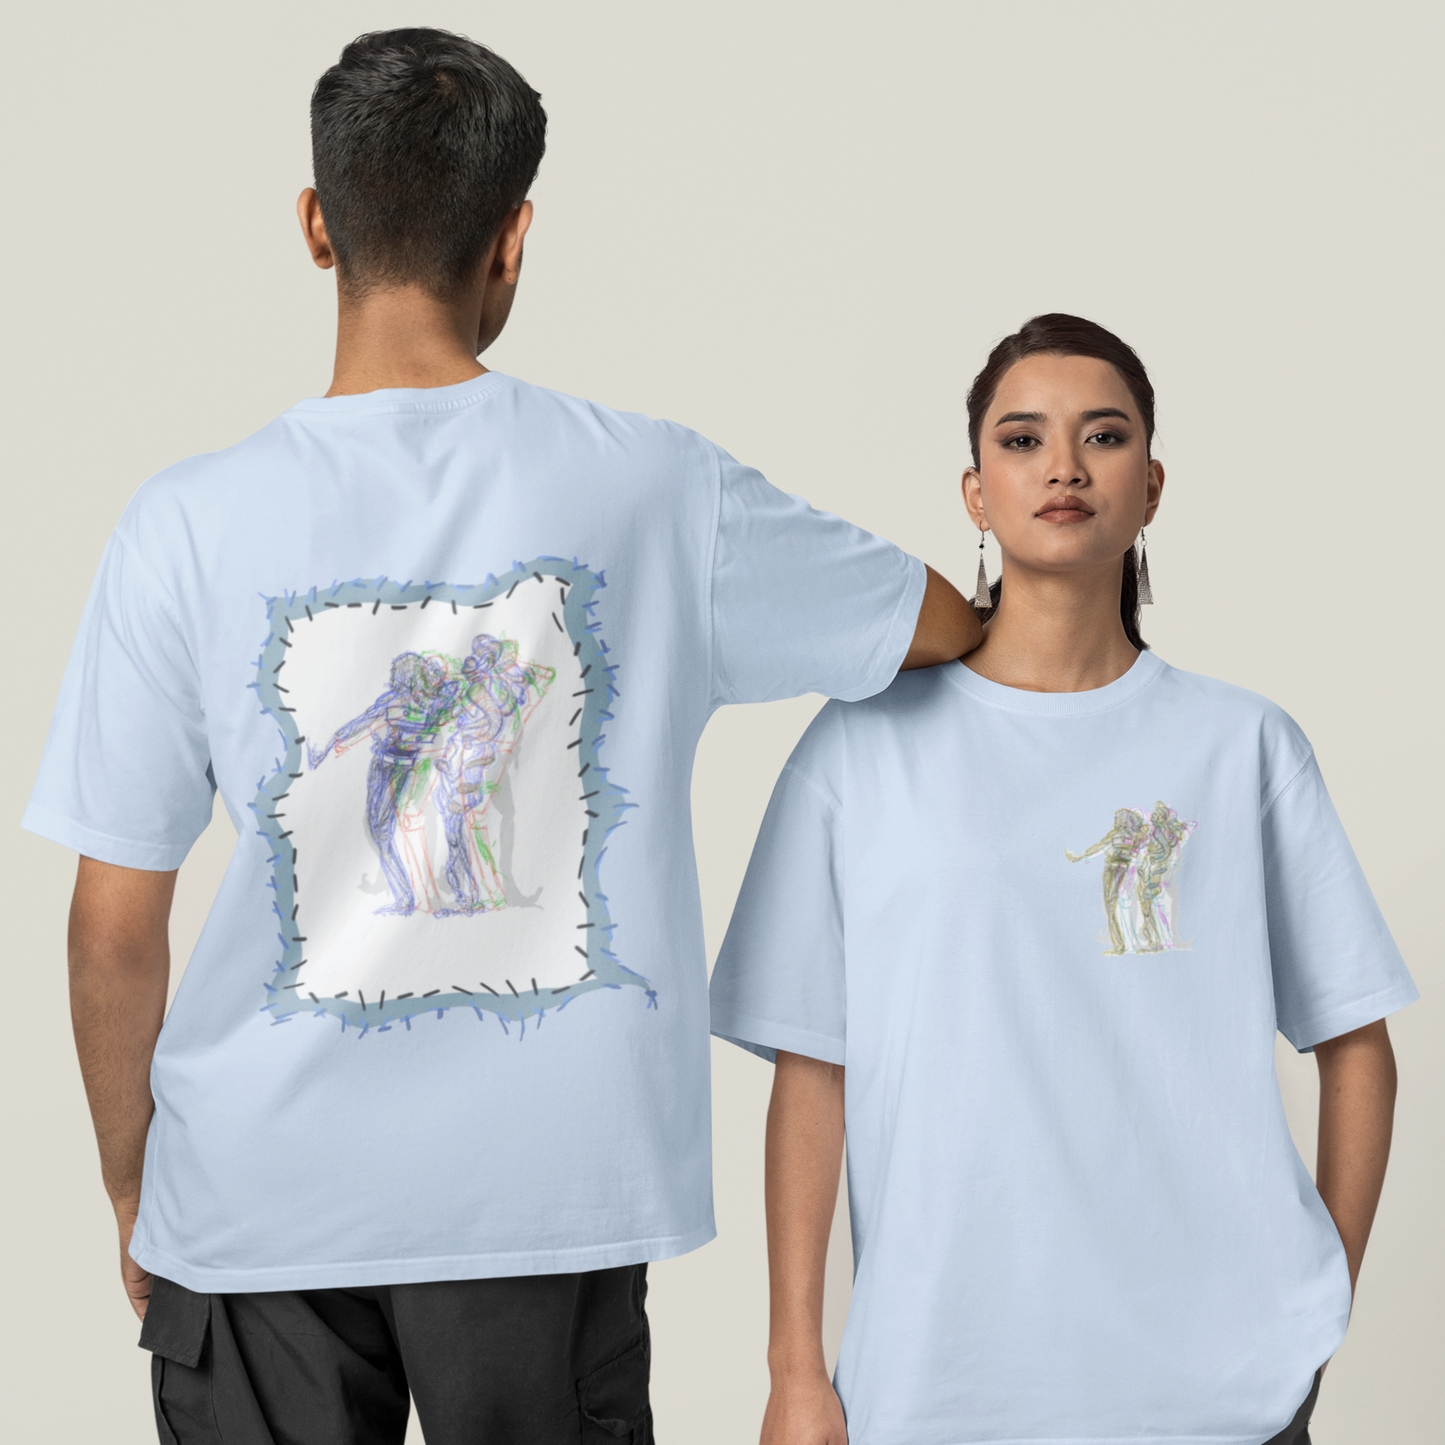 Tranquil Tunica - Original T-Shirt Unisex Front and Back Print